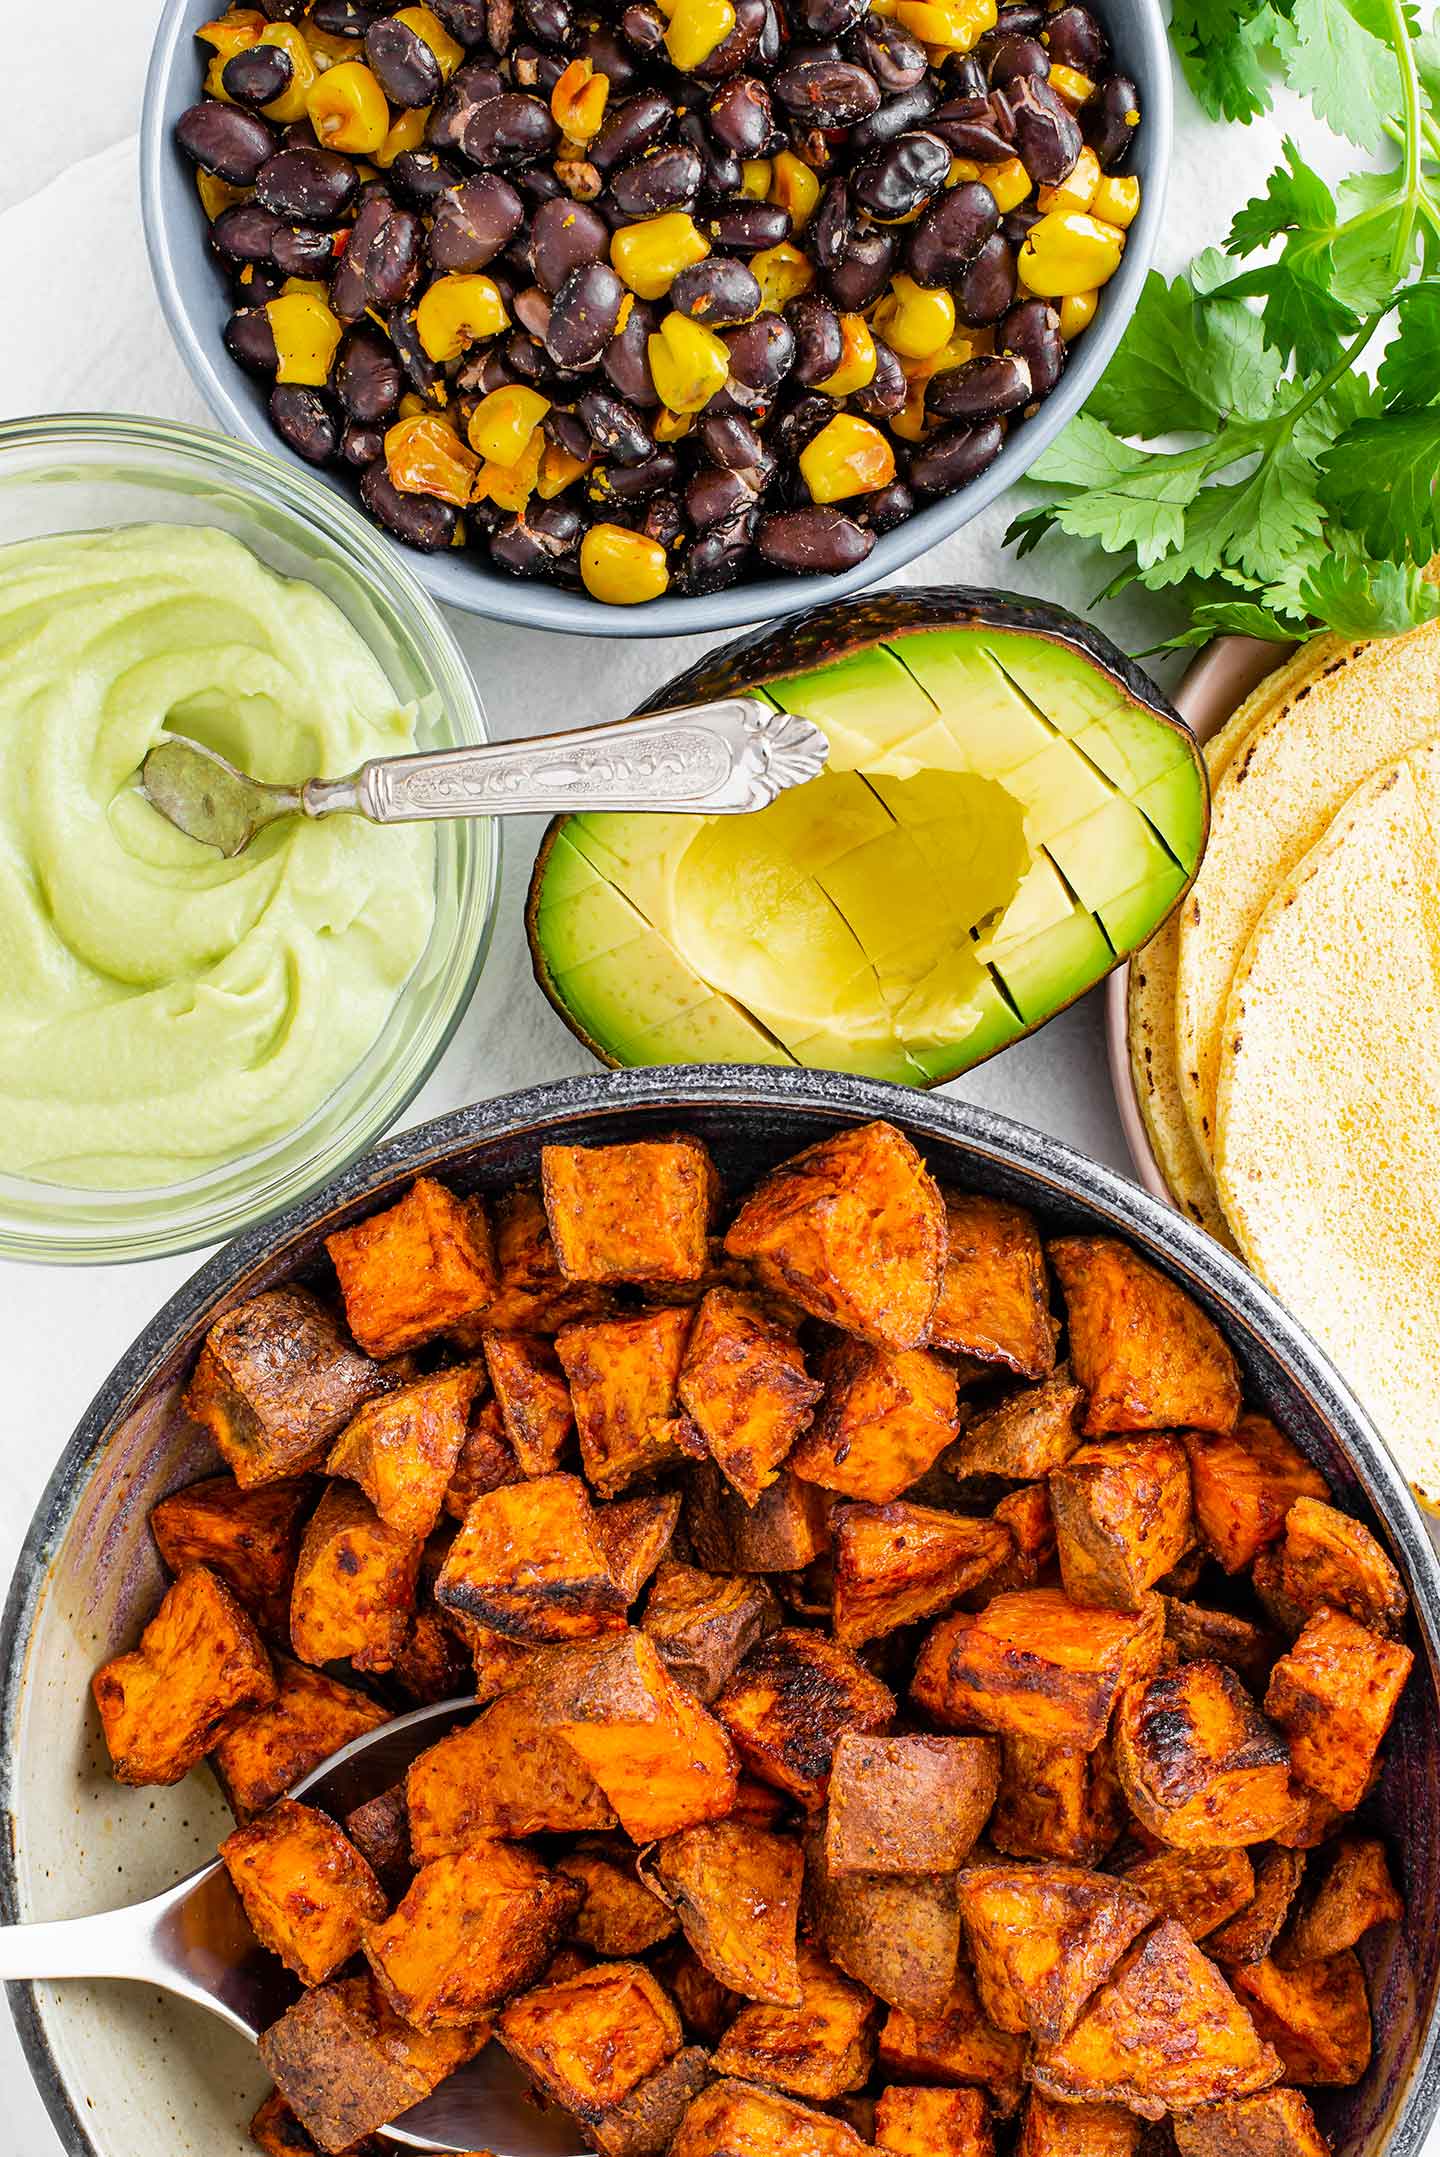 Top down view of roasted sweet potato, charred corn and black beans, a scored avocado half, corn tortillas, and a small dish of avocado lime crema. 